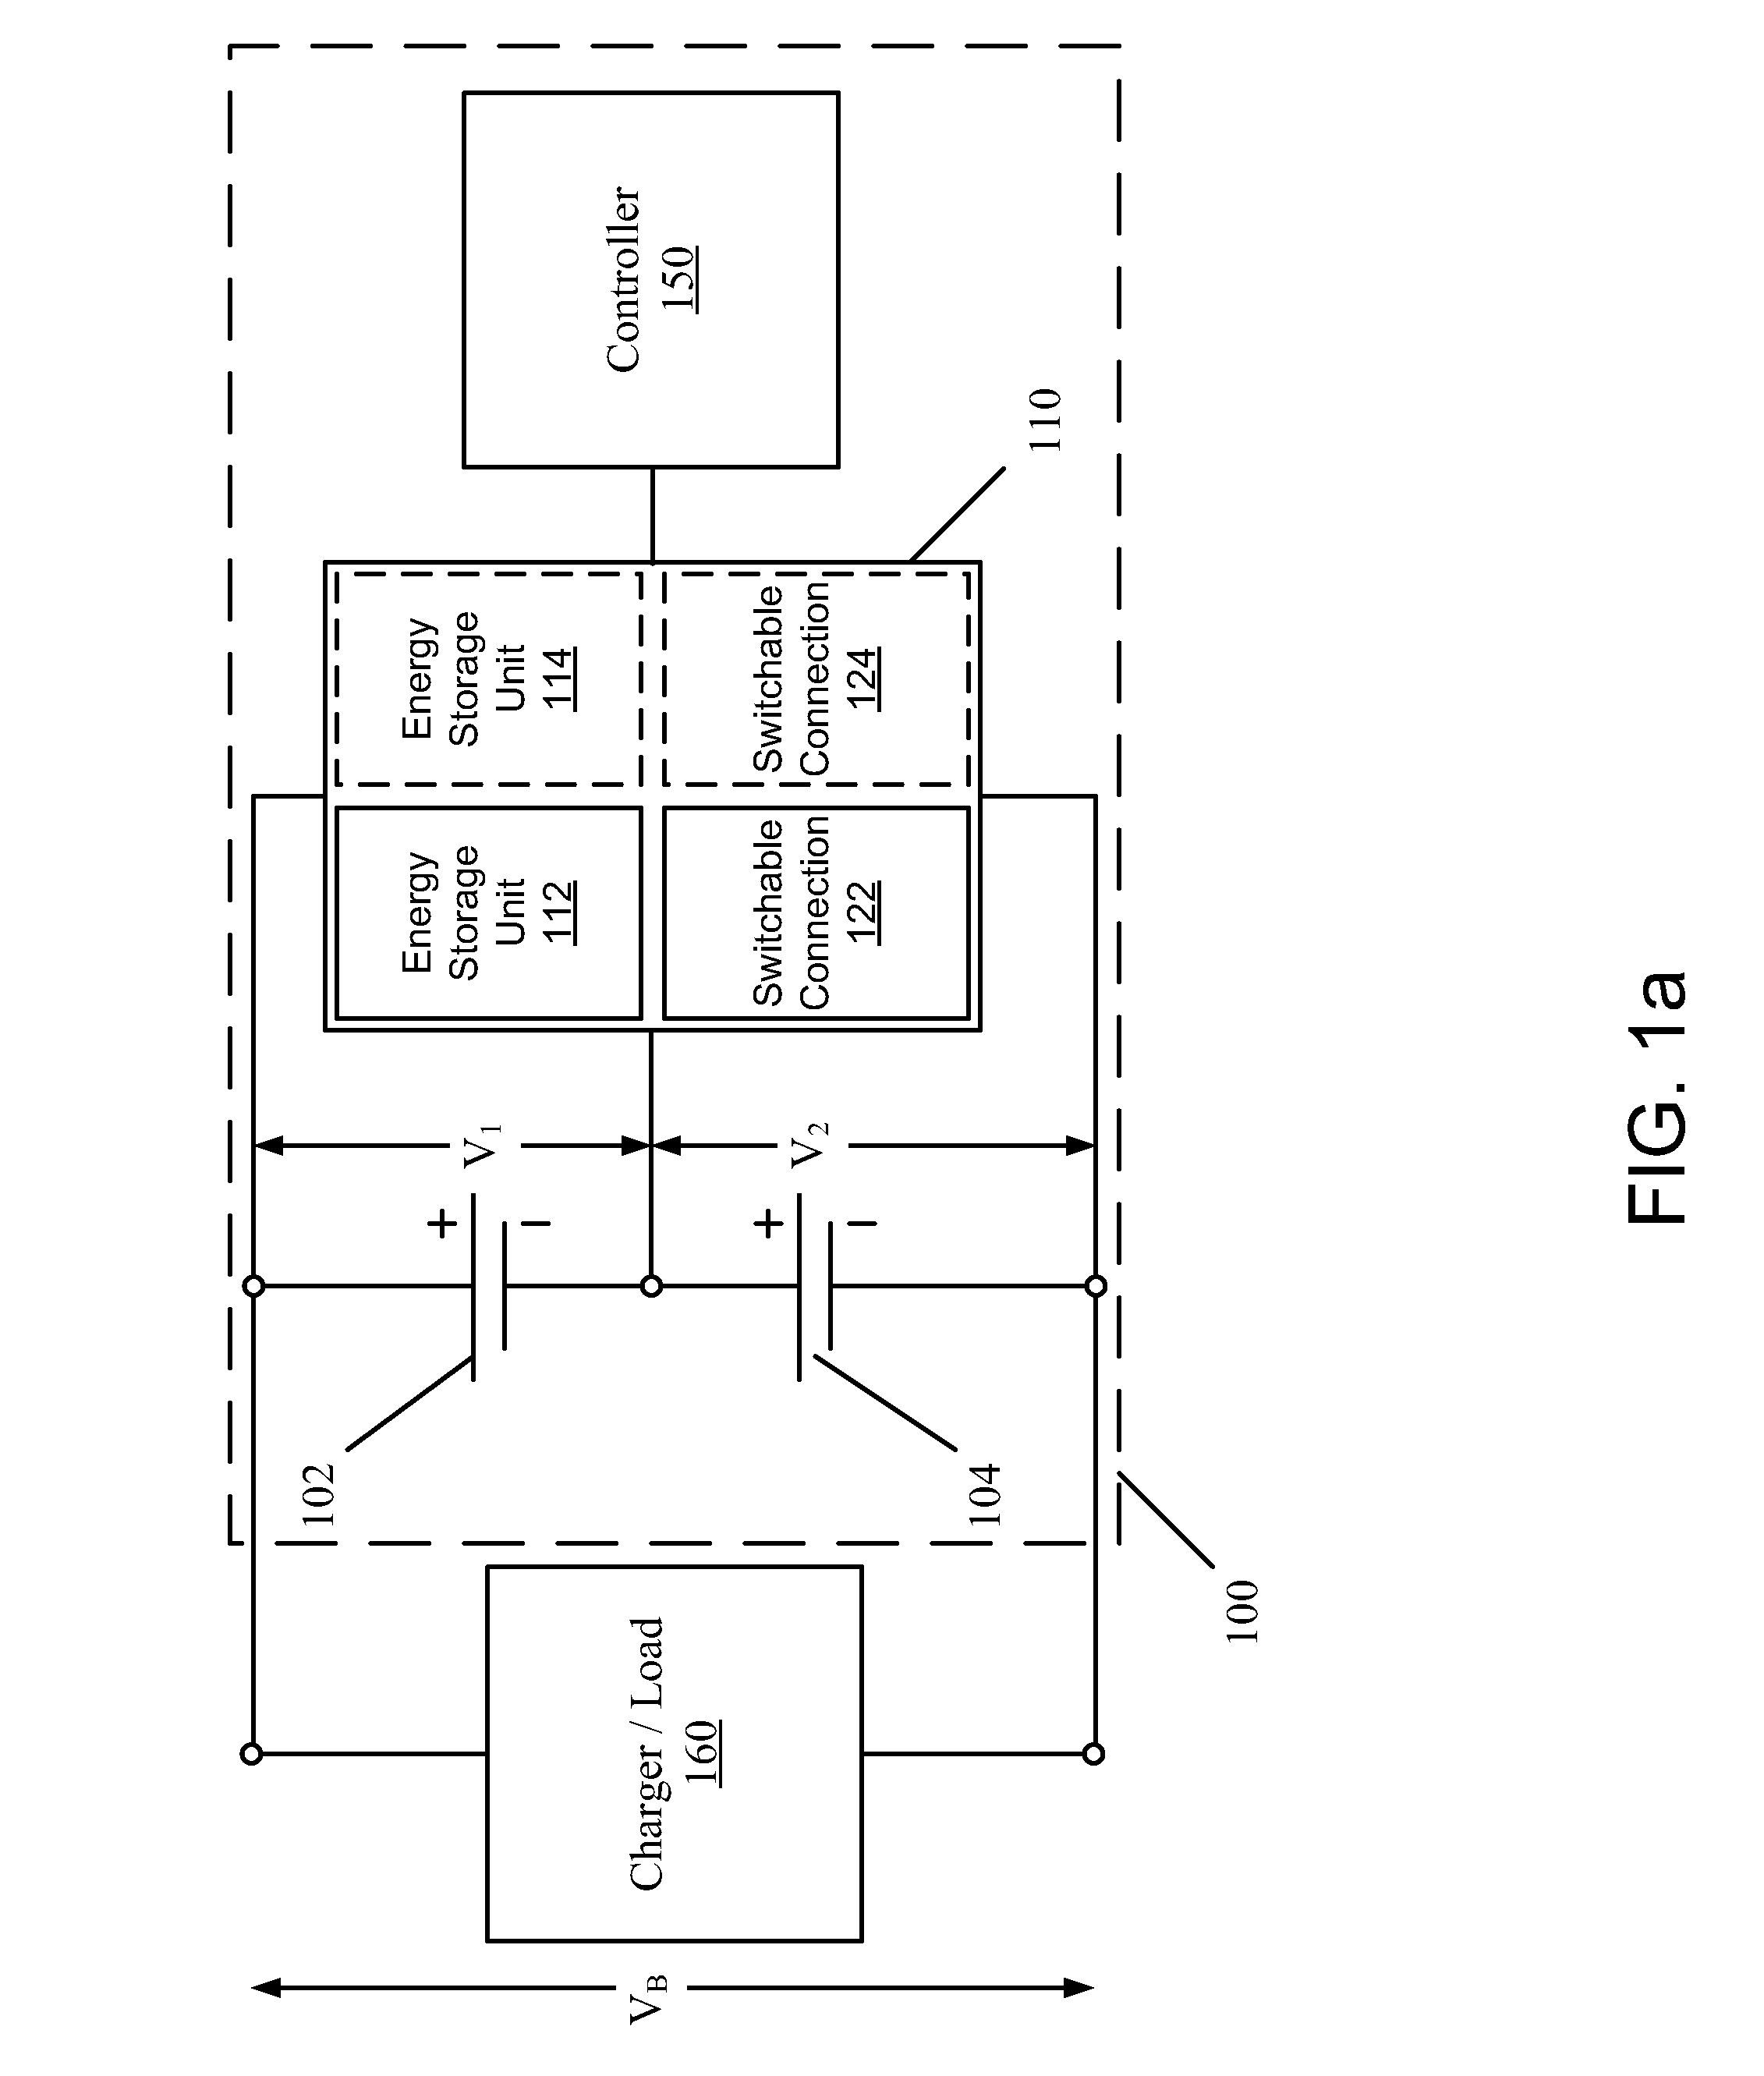 Enhanced battery storage and recovery energy systems